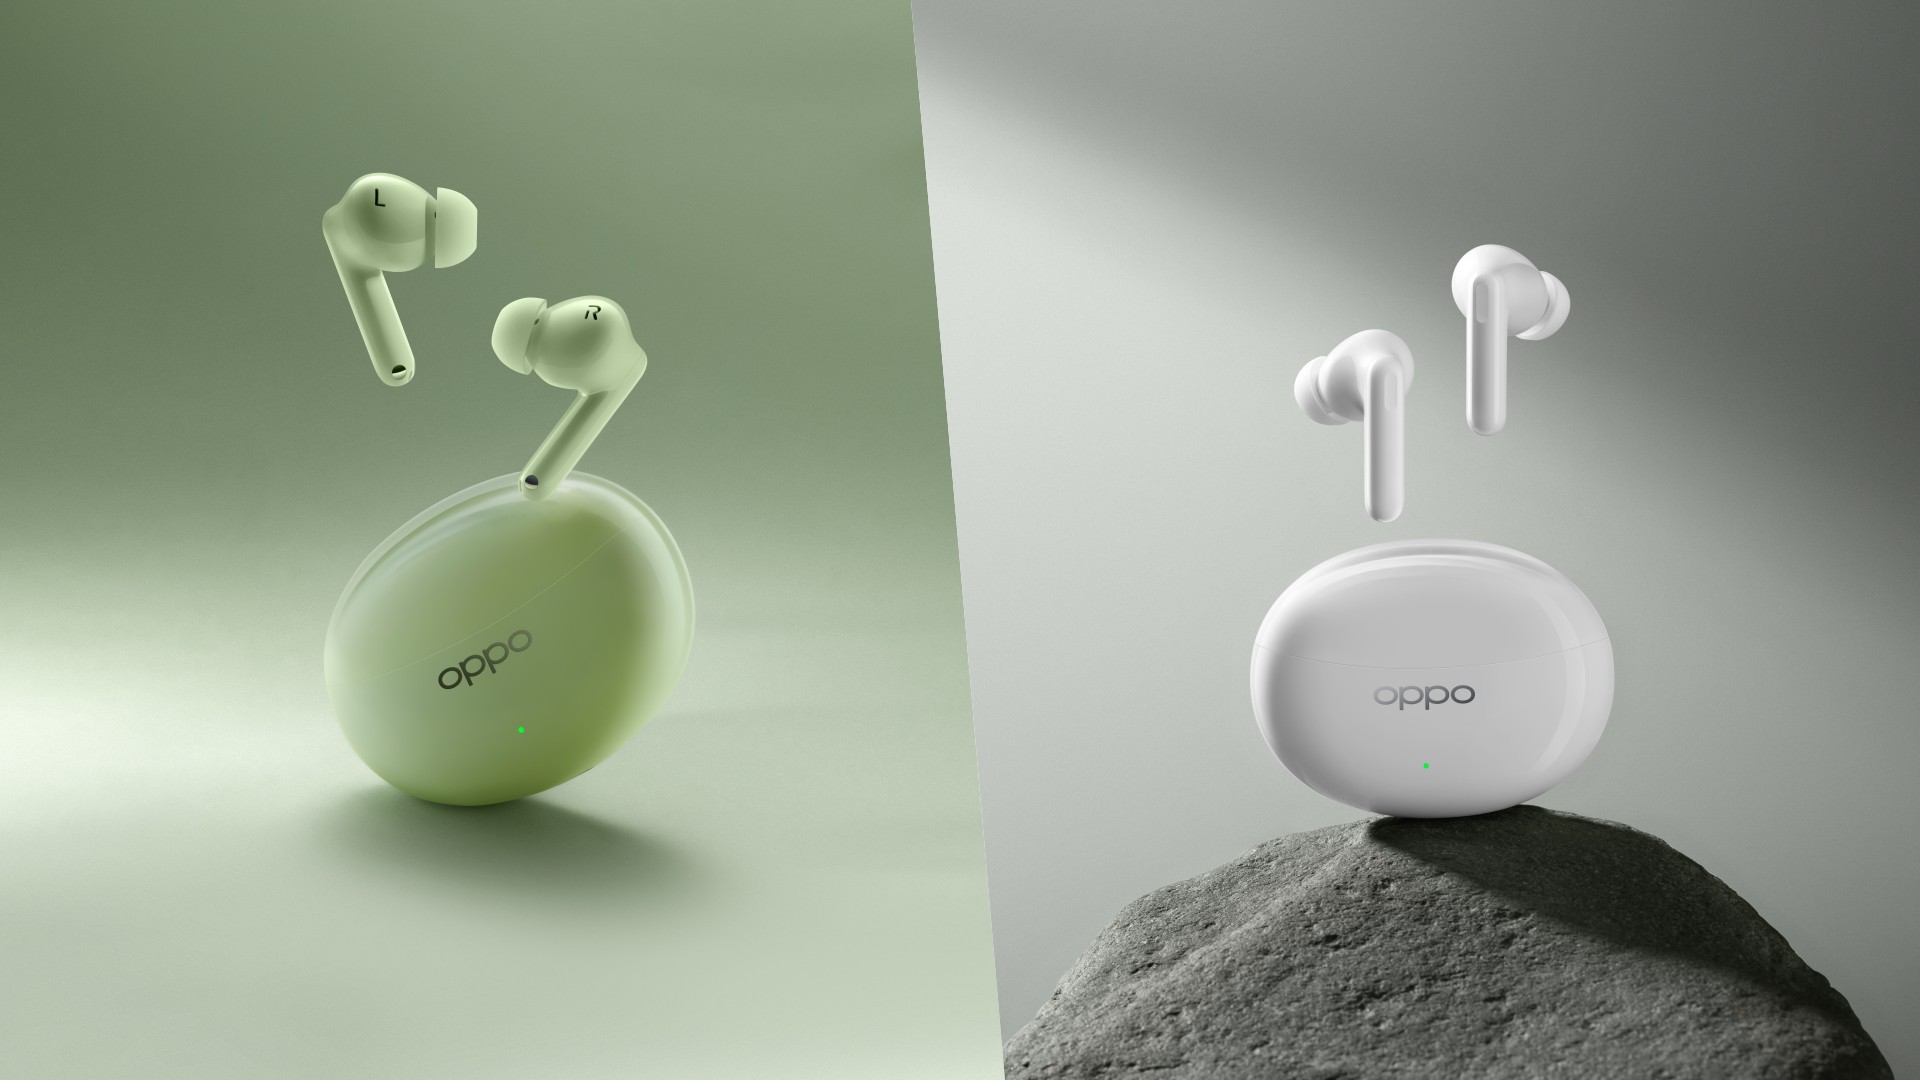 REVIEW  Oppo Enco Air3 wireless earbuds